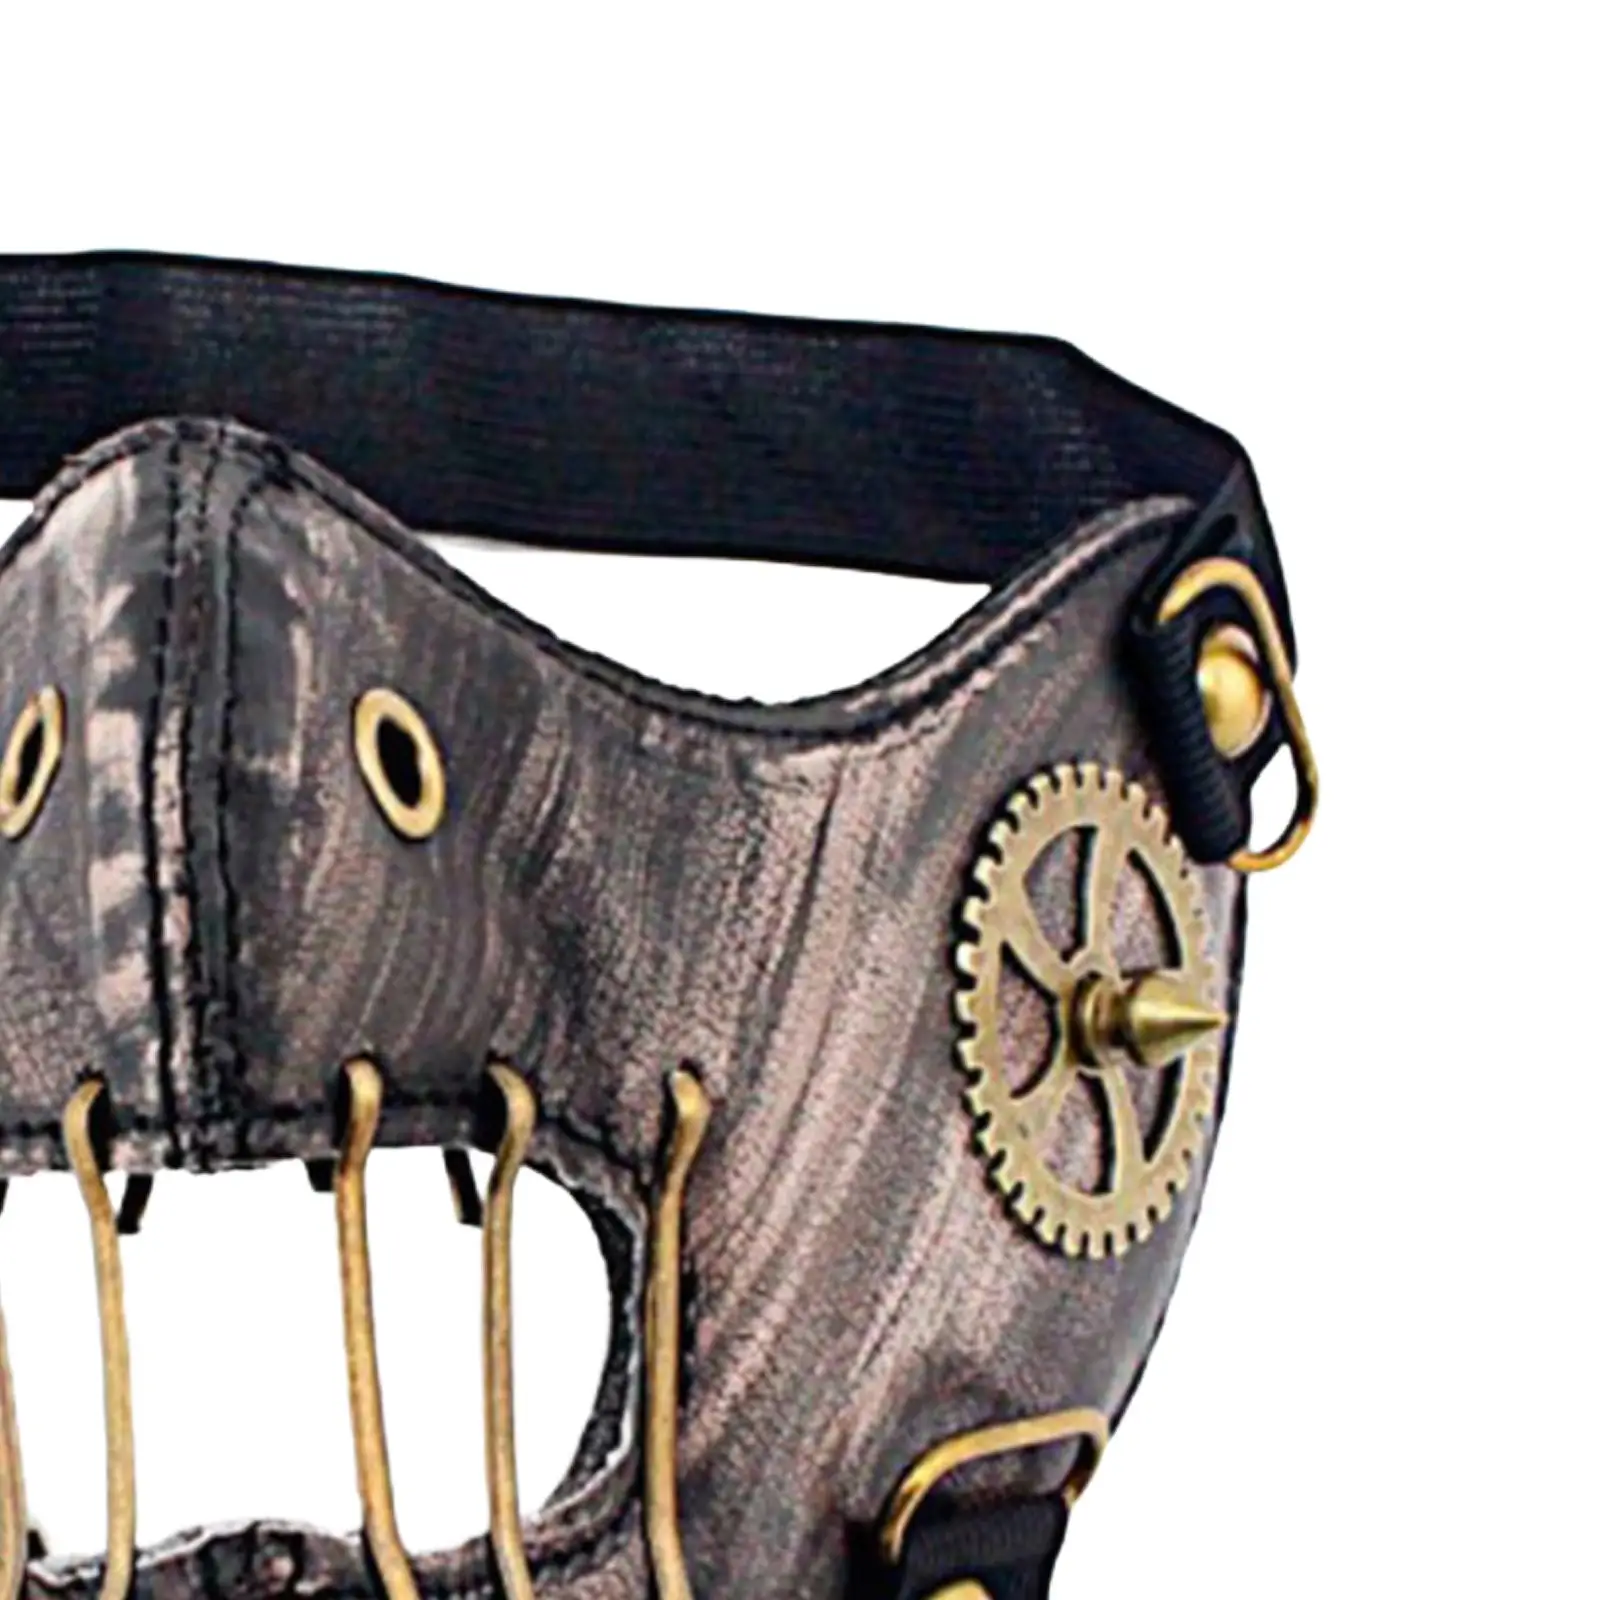 Steampunk Mask Gothic Dustproof Half Face Mask for Masquerade Bar Party